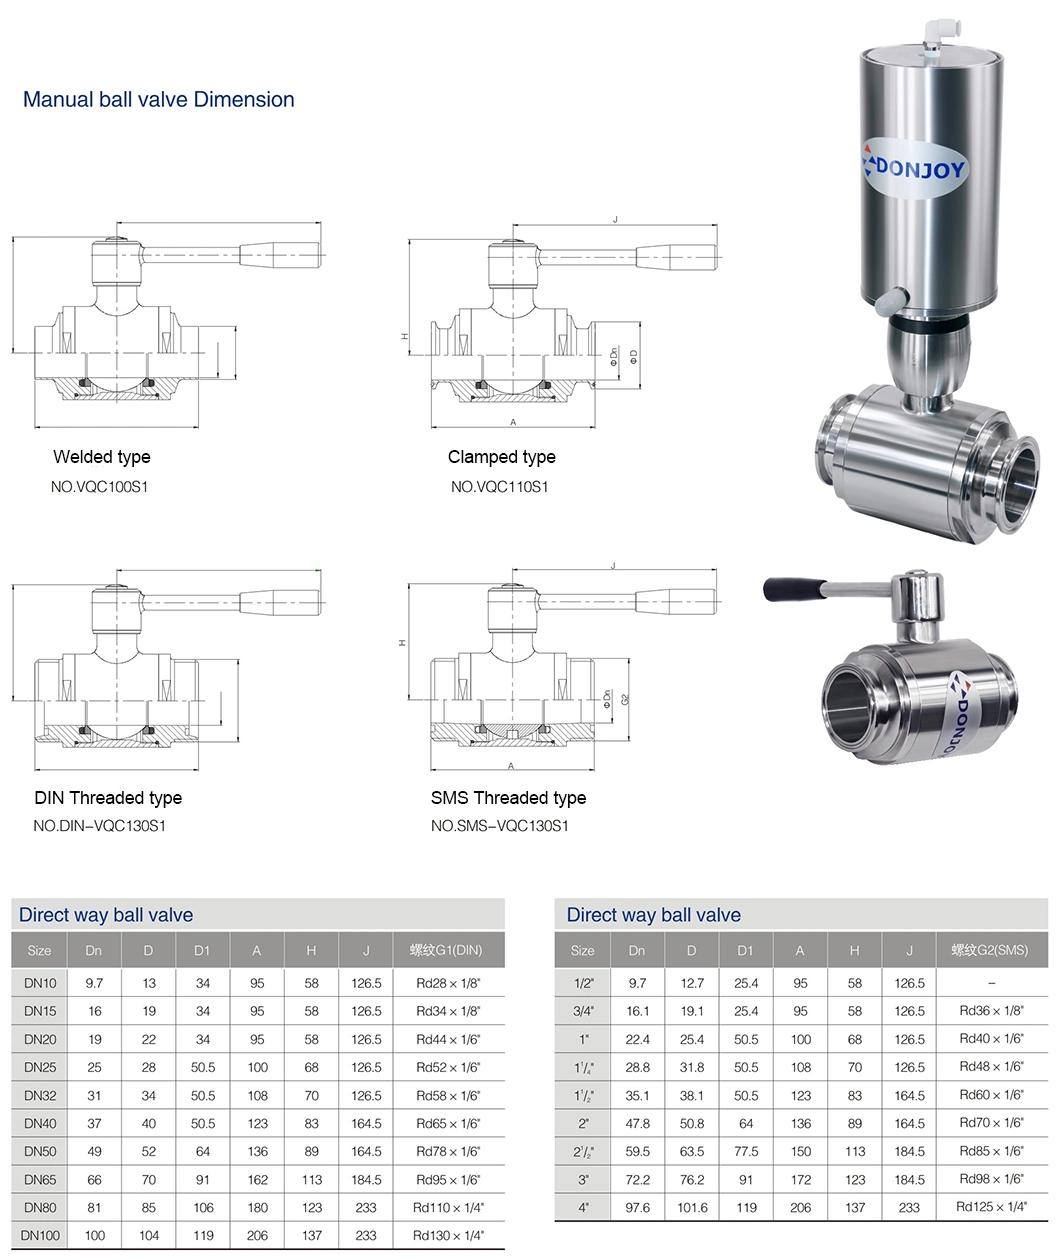 Us 3A Donjoy Sanitary Ball Valve with Intelligent Positioner